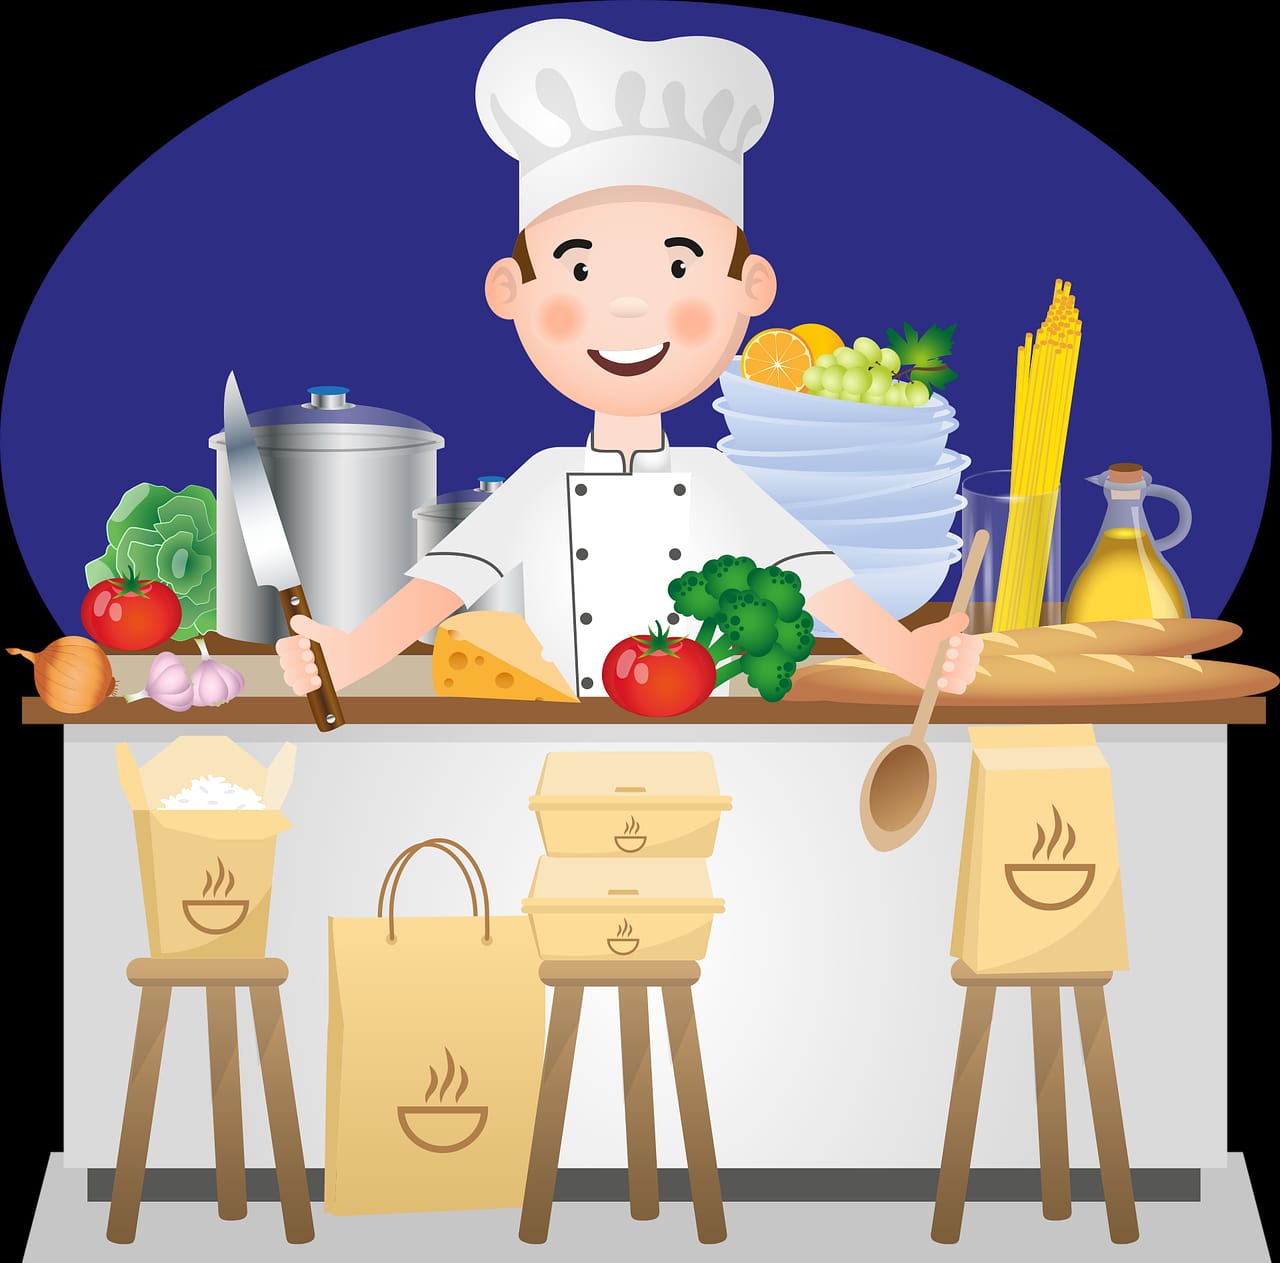 A chef ready to cook